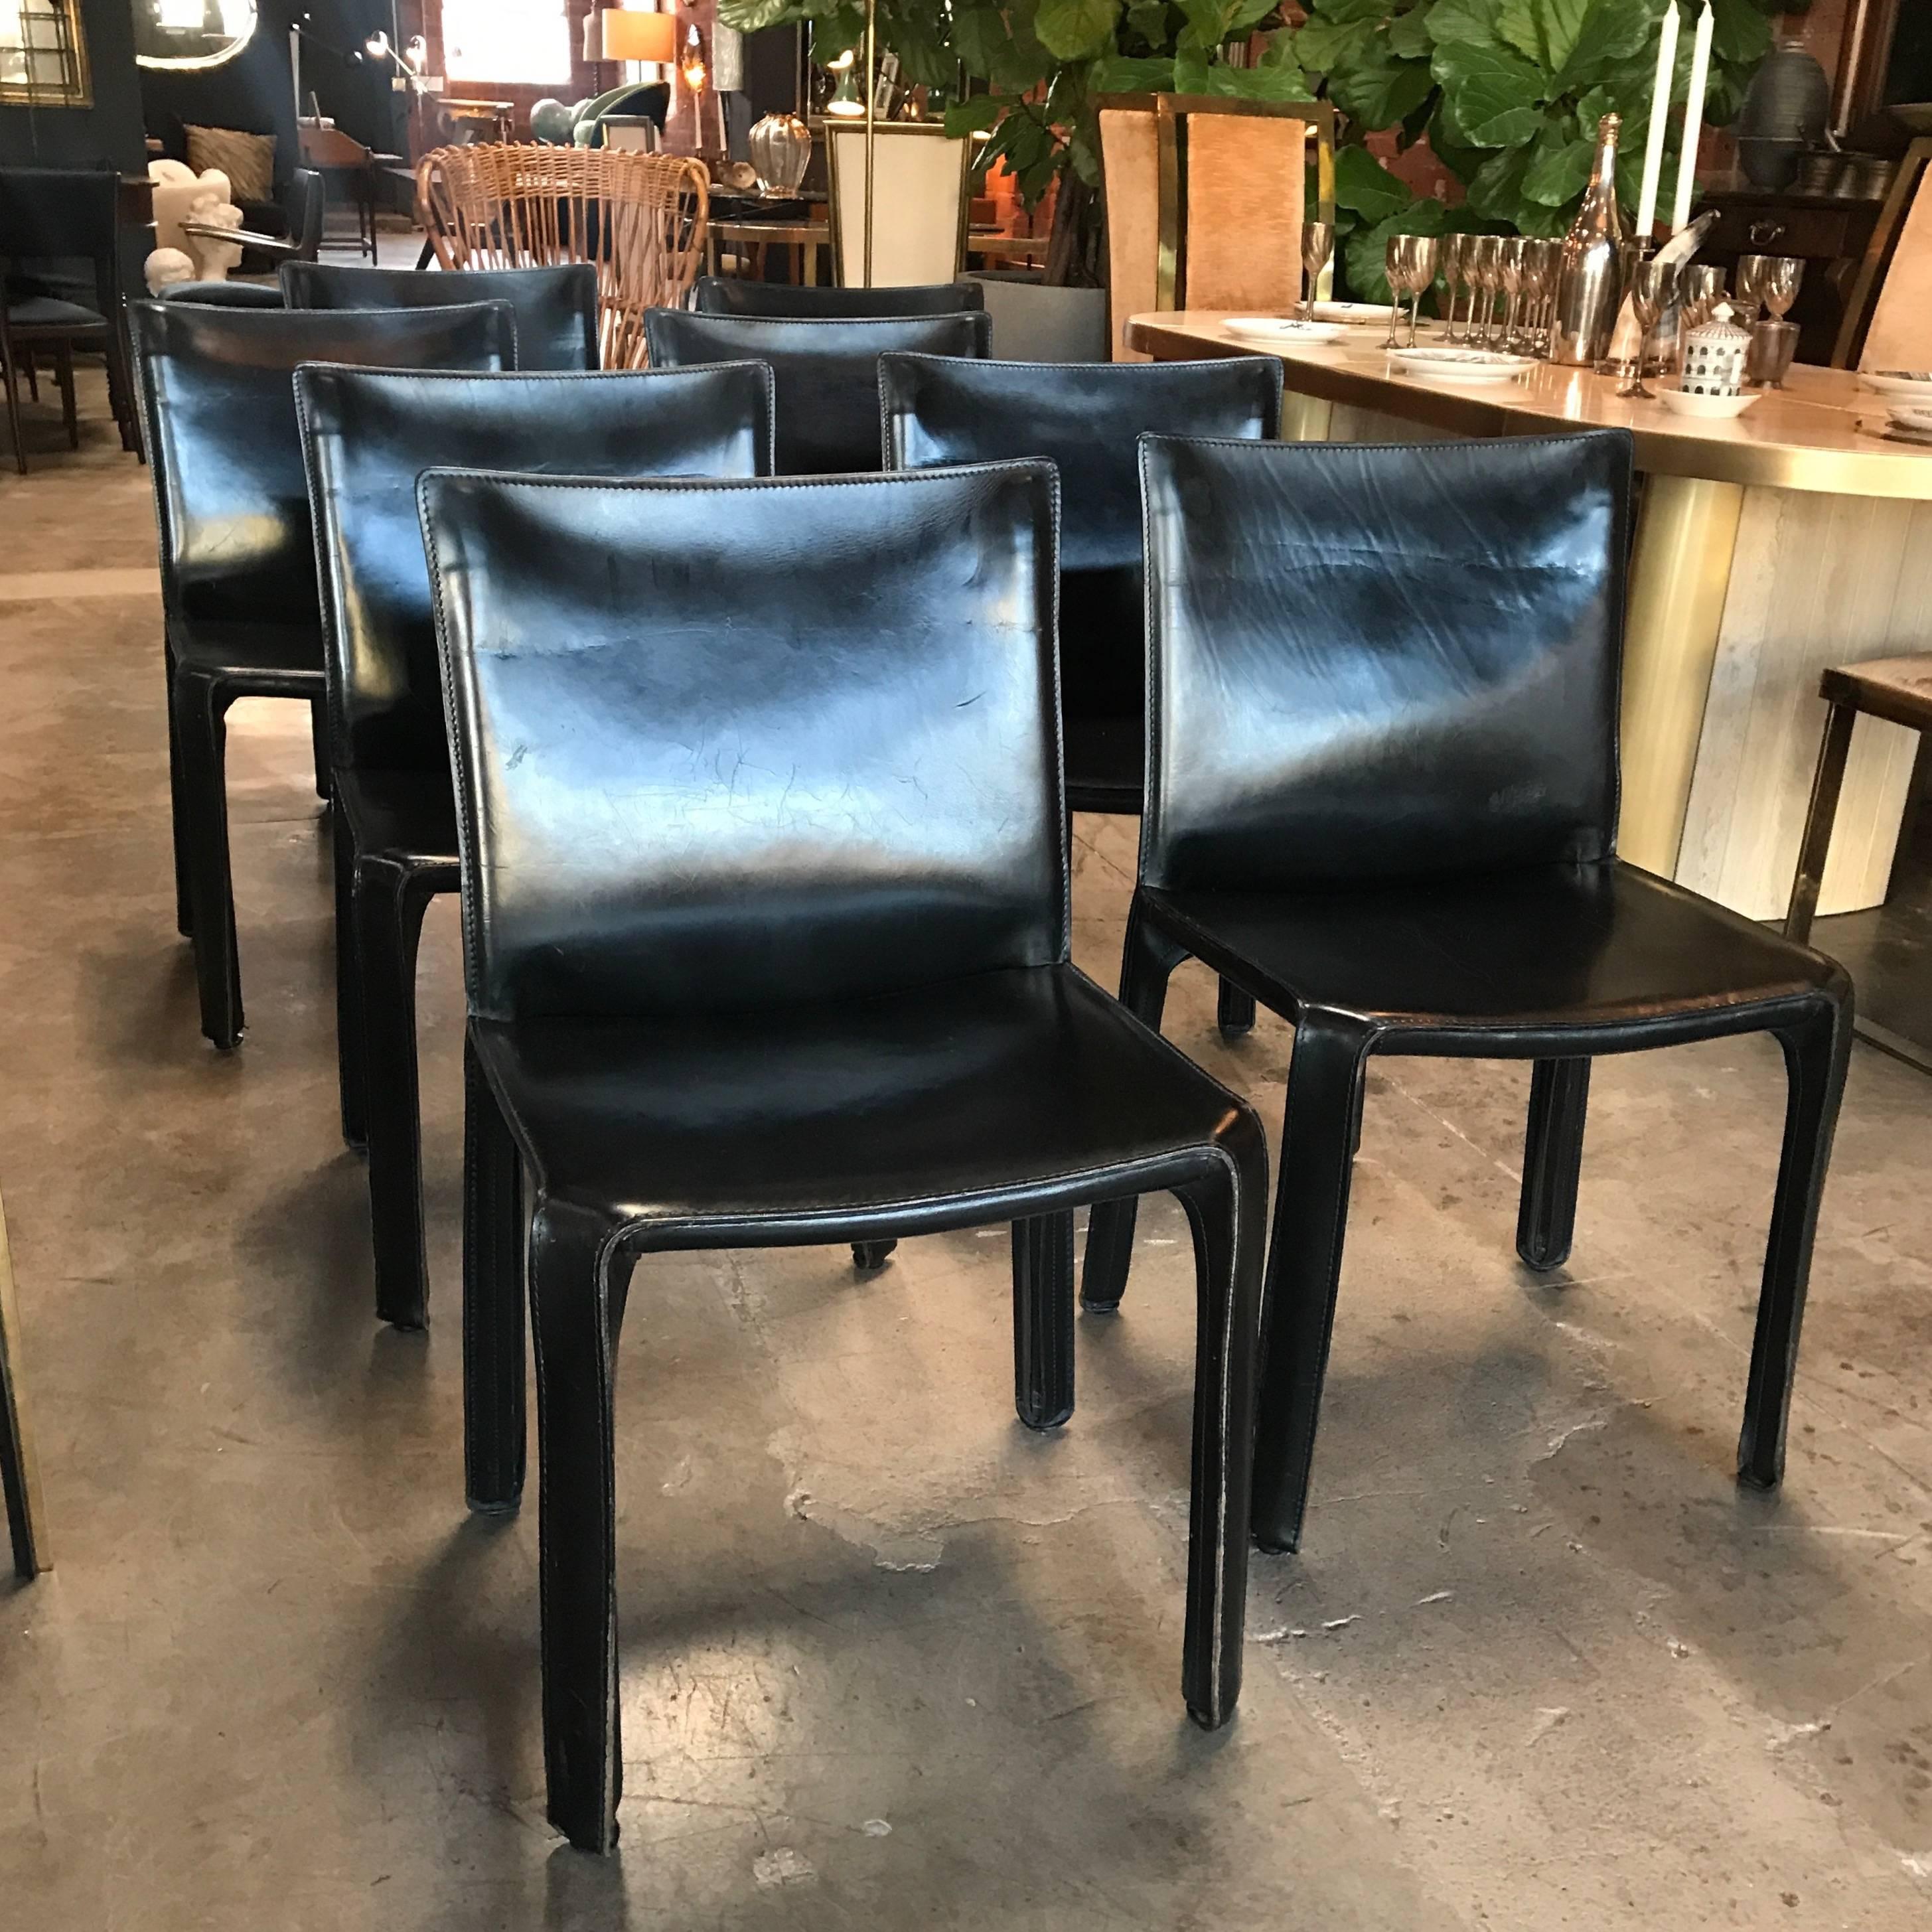 Cassina chairs, model cab nr. 412 by Mario Bellini in black leather. Set of eight.
The cab chair was conceived by the architect and designer Mario Bellini in 1977. Cassina produced a skeleton in tubular steel and stretched leather which is then